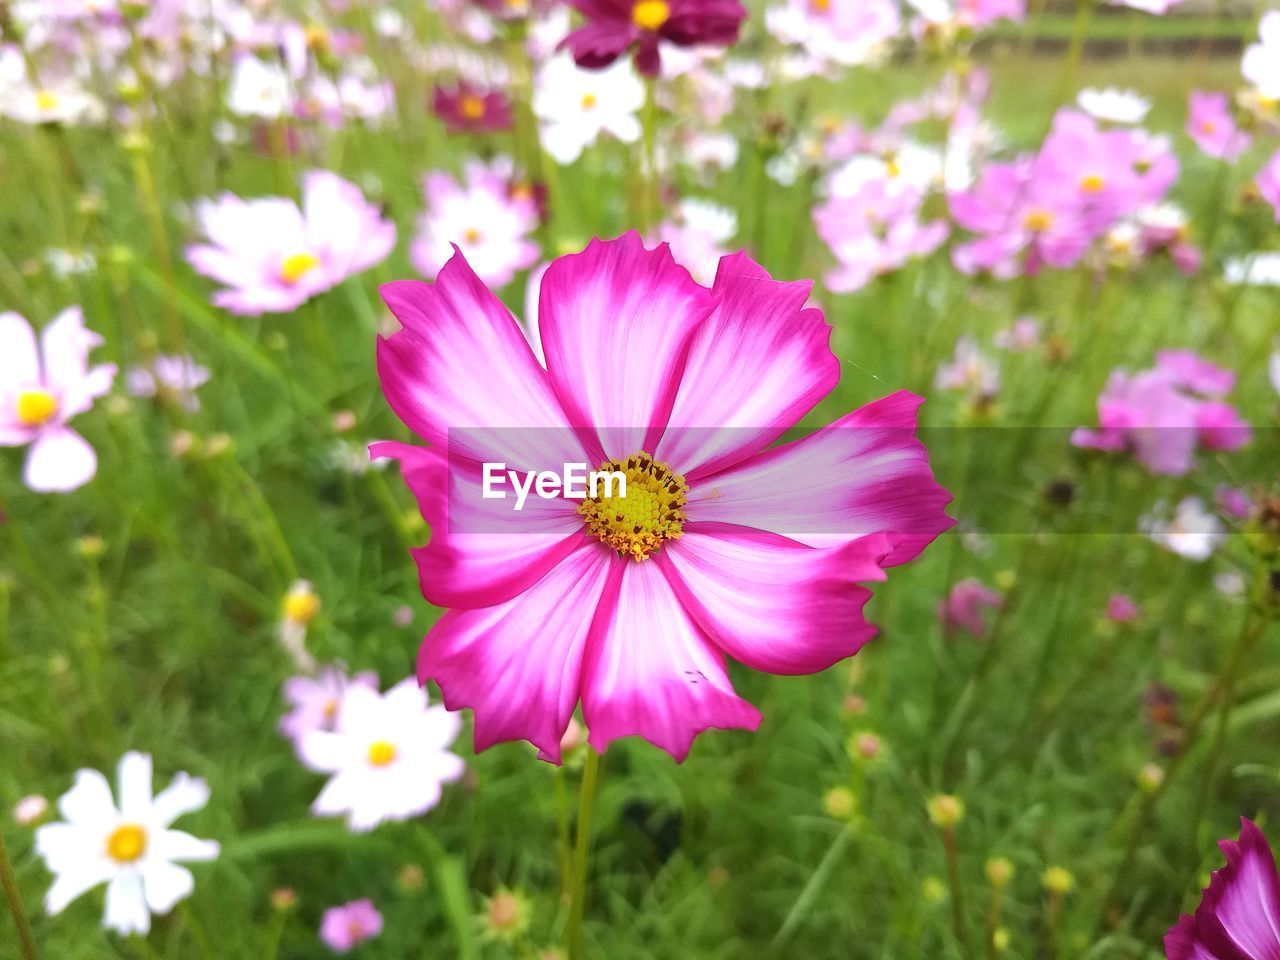 flower, flowering plant, garden cosmos, plant, freshness, beauty in nature, fragility, petal, flower head, cosmos, close-up, inflorescence, growth, pink, cosmos flower, nature, pollen, no people, meadow, focus on foreground, field, daisy, day, outdoors, wildflower, springtime, grass, green, summer, land